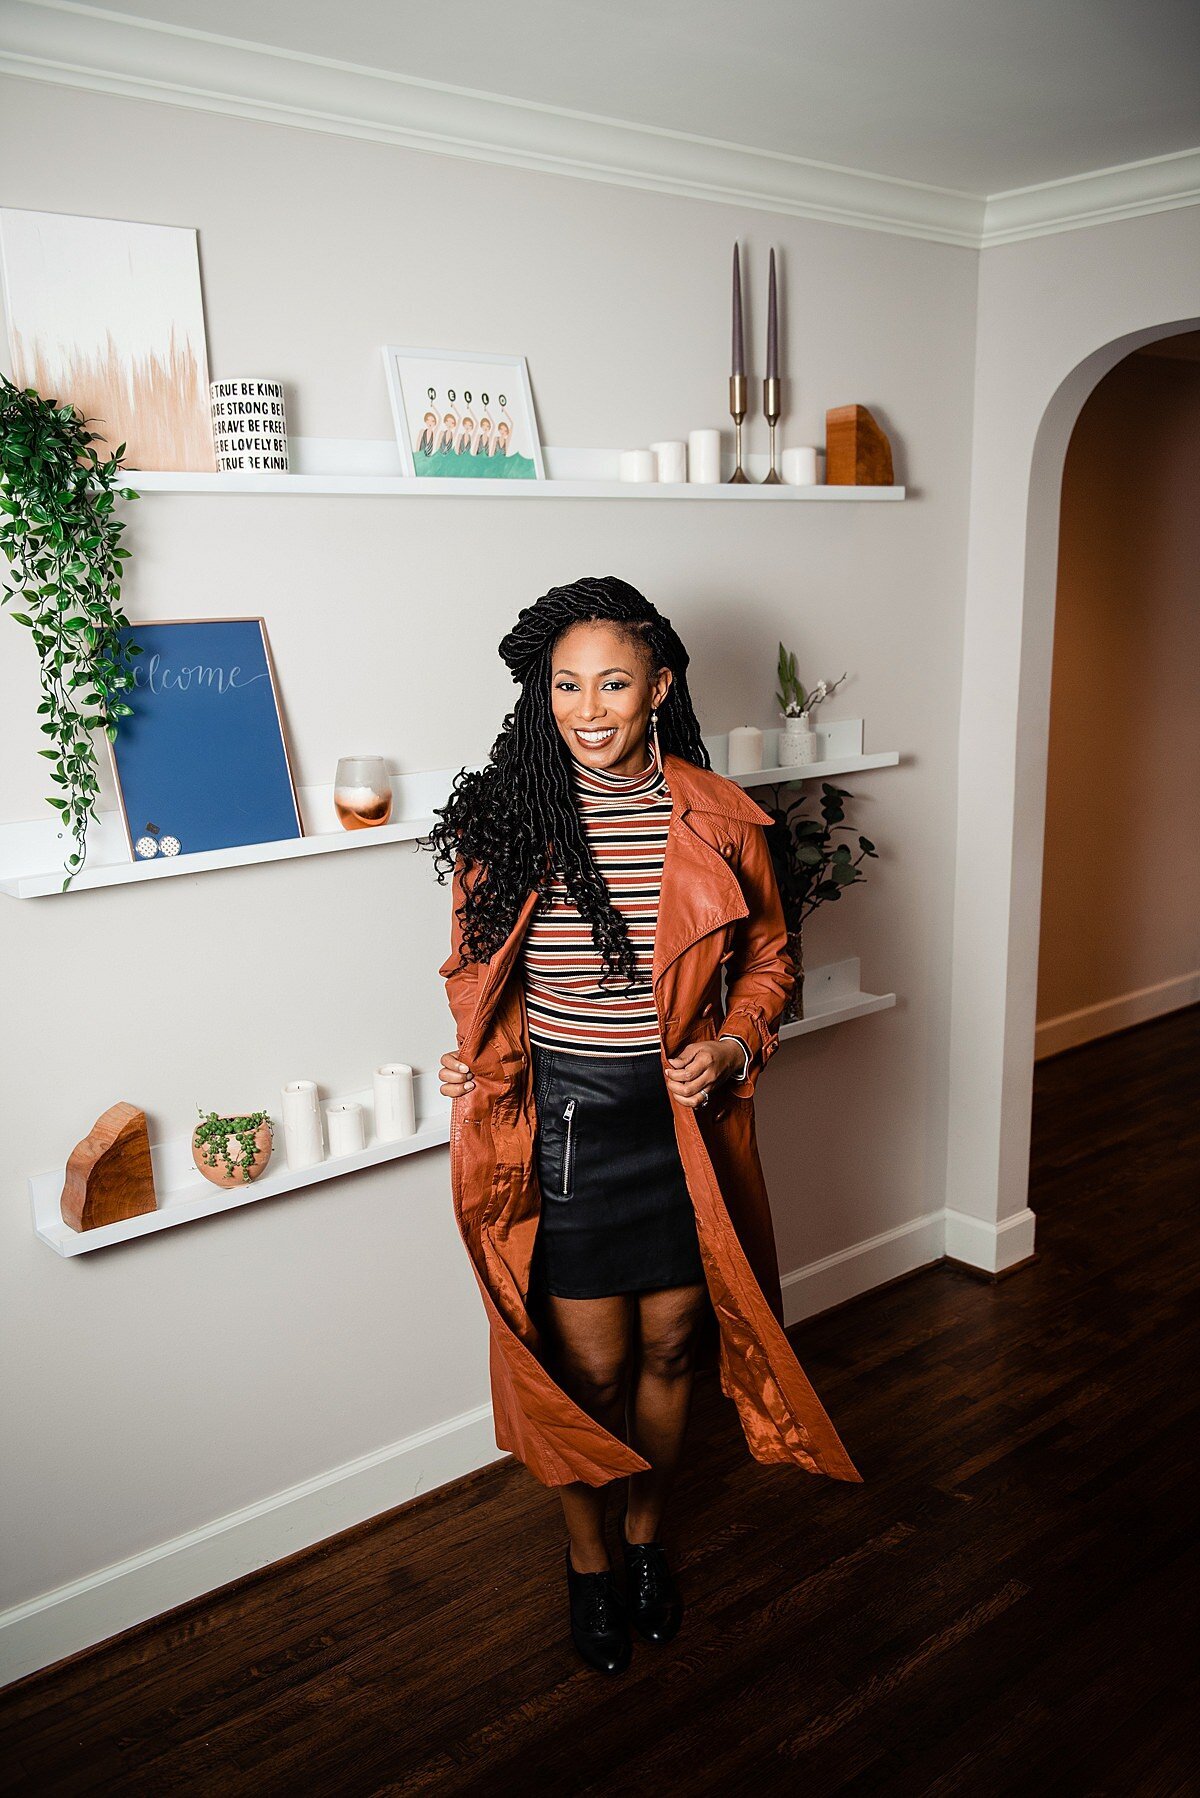 Sheena wearing a black leather skirt, stripped shirt and orange leather trench coast inside kitchen